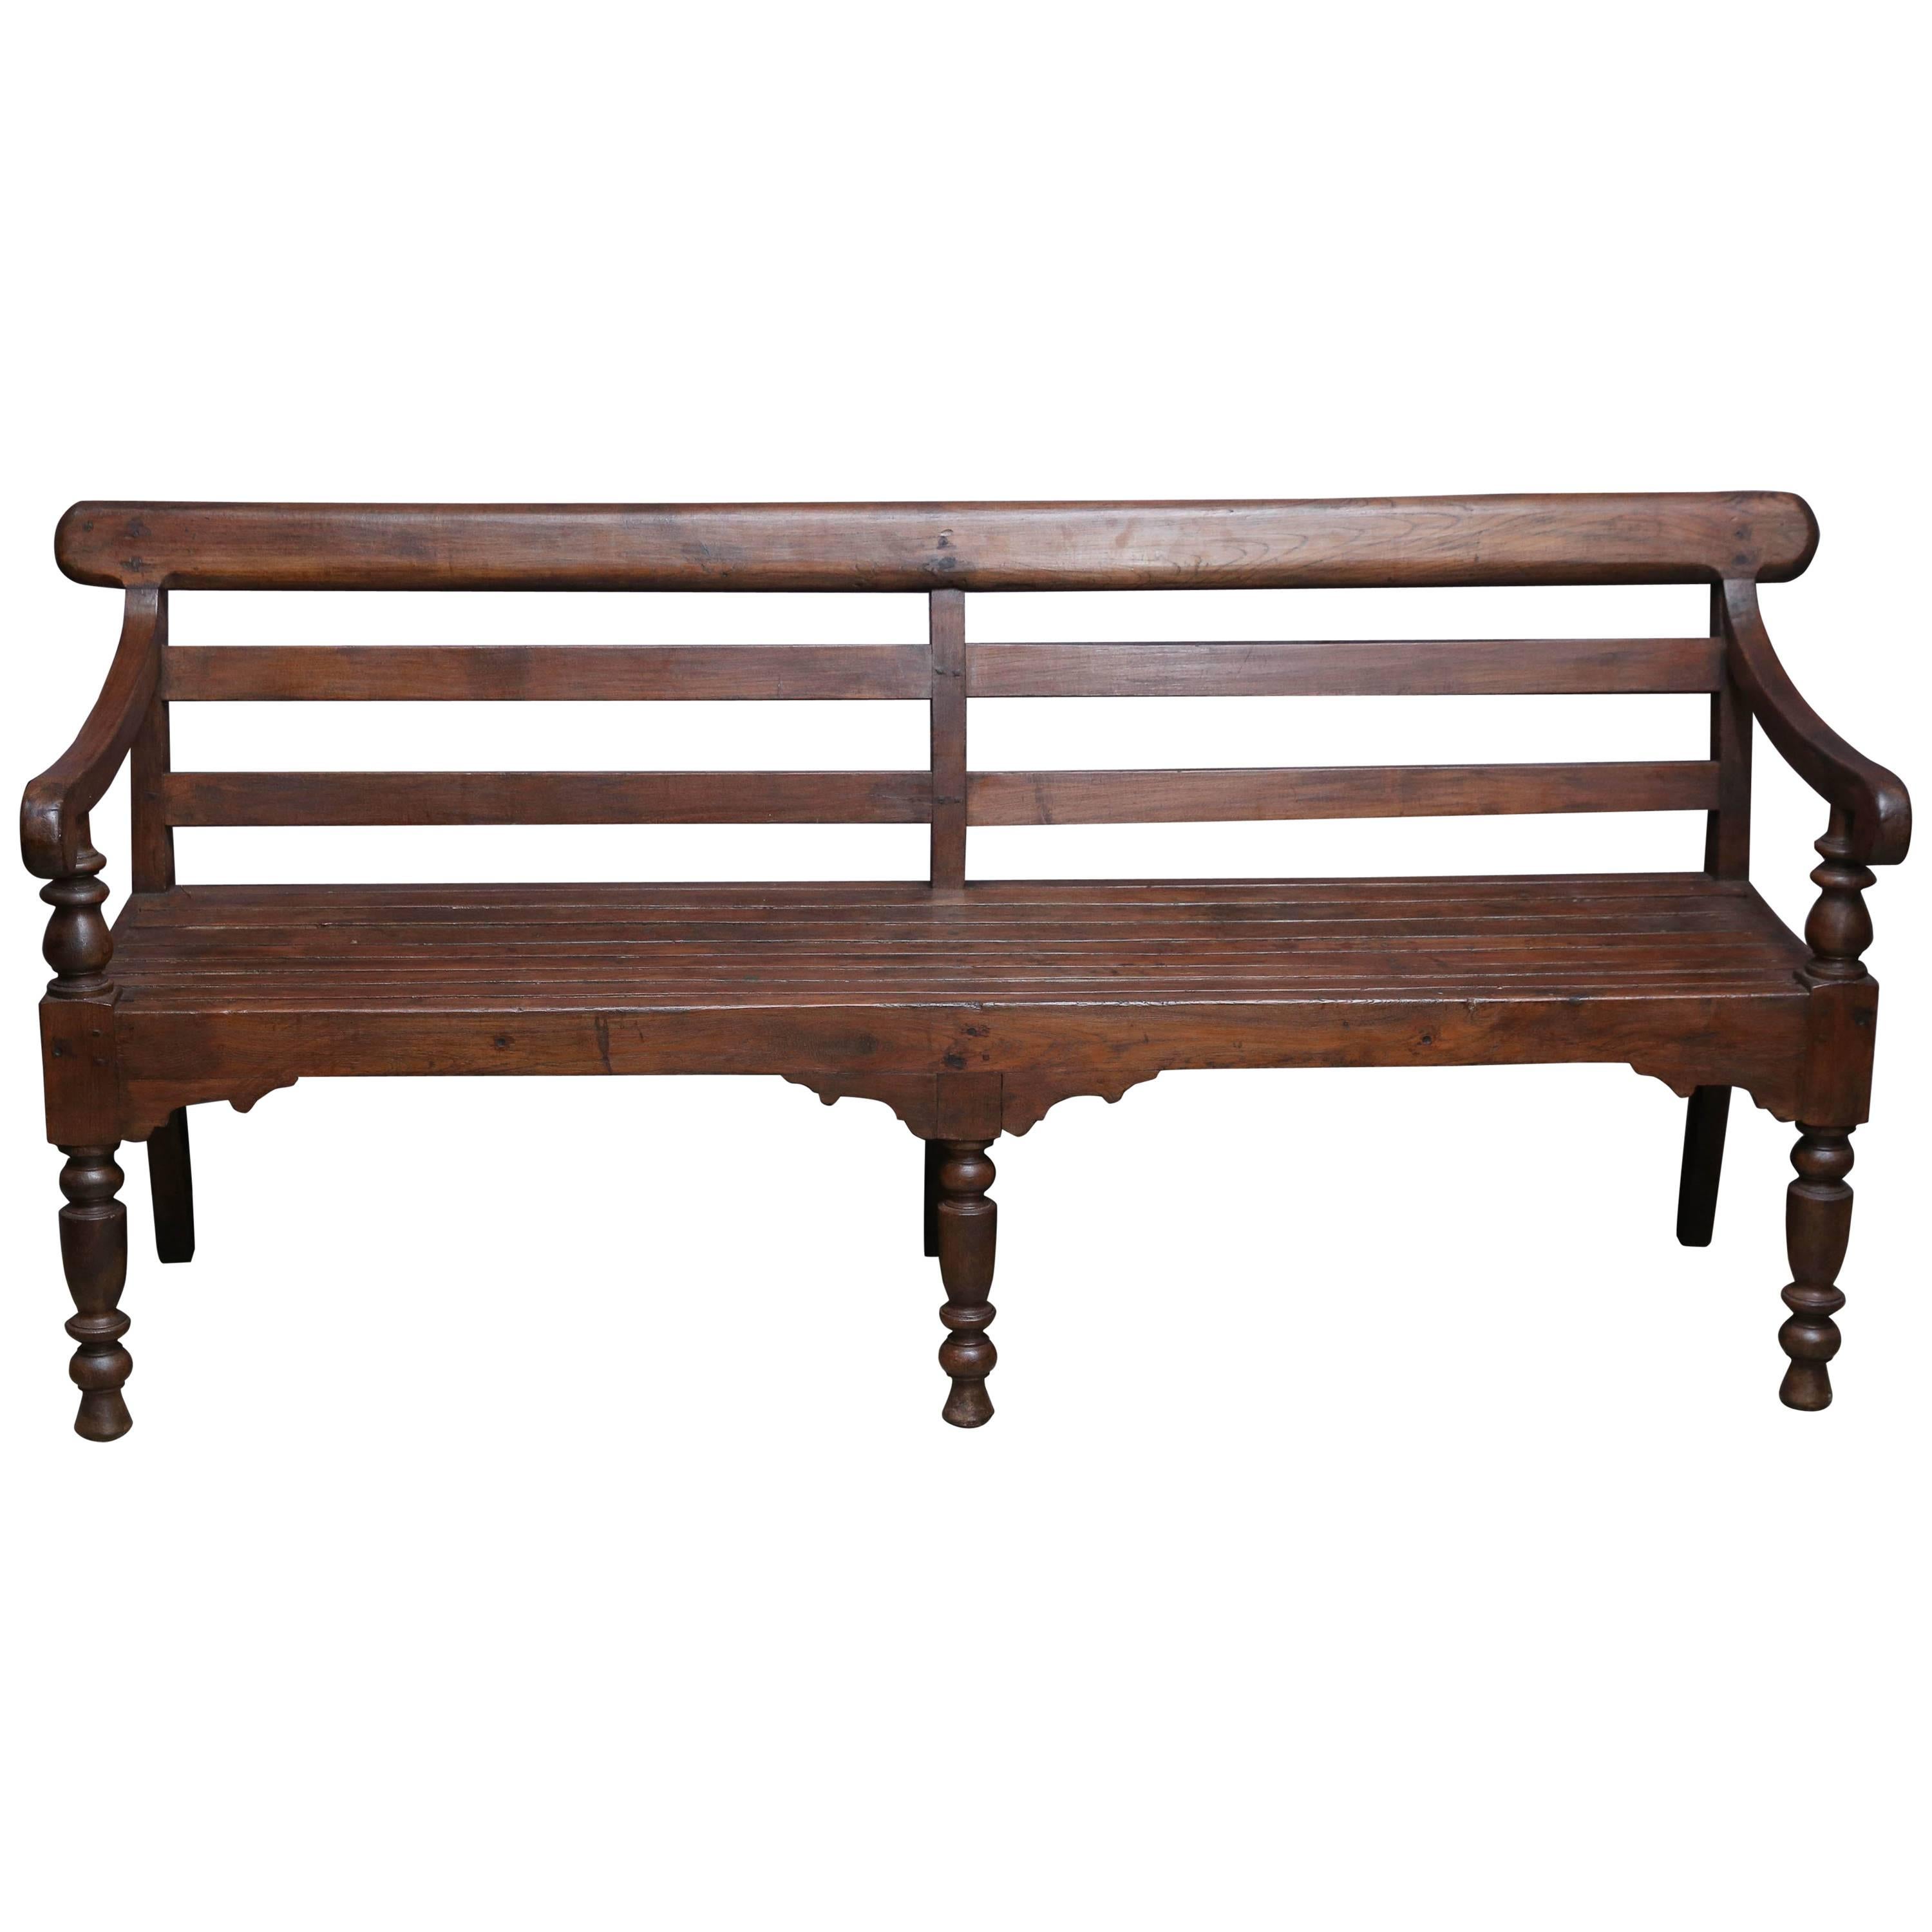 Late 19th Century Solid Teak Wood Bench from a Colonial Tea Plantation